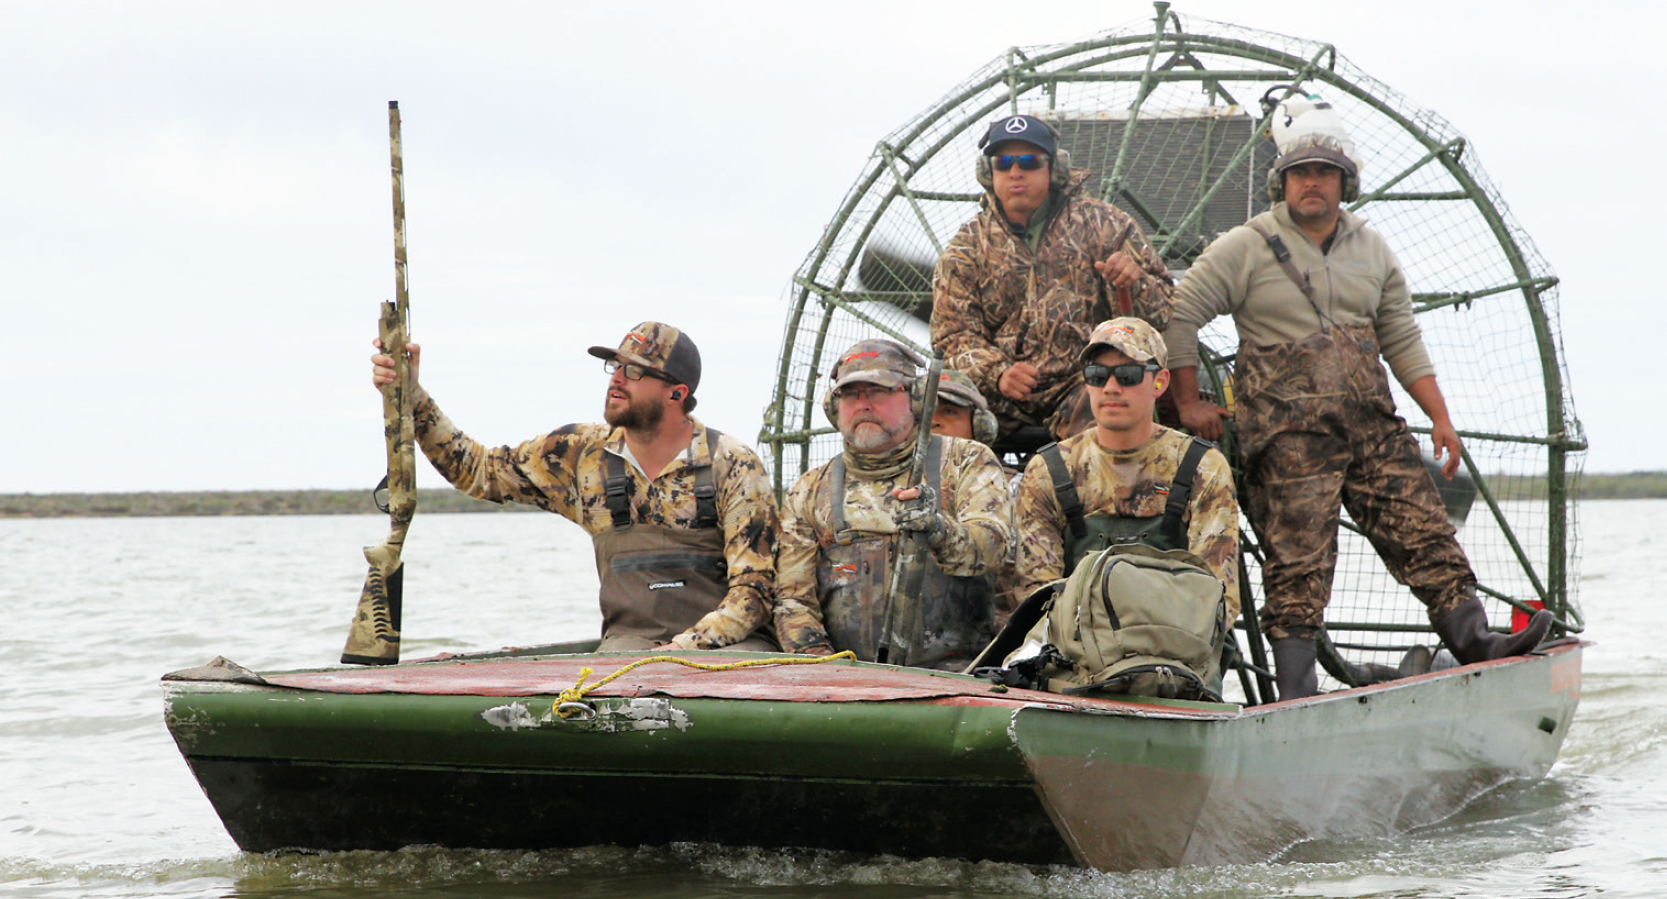 duck hunters in mexico on boat